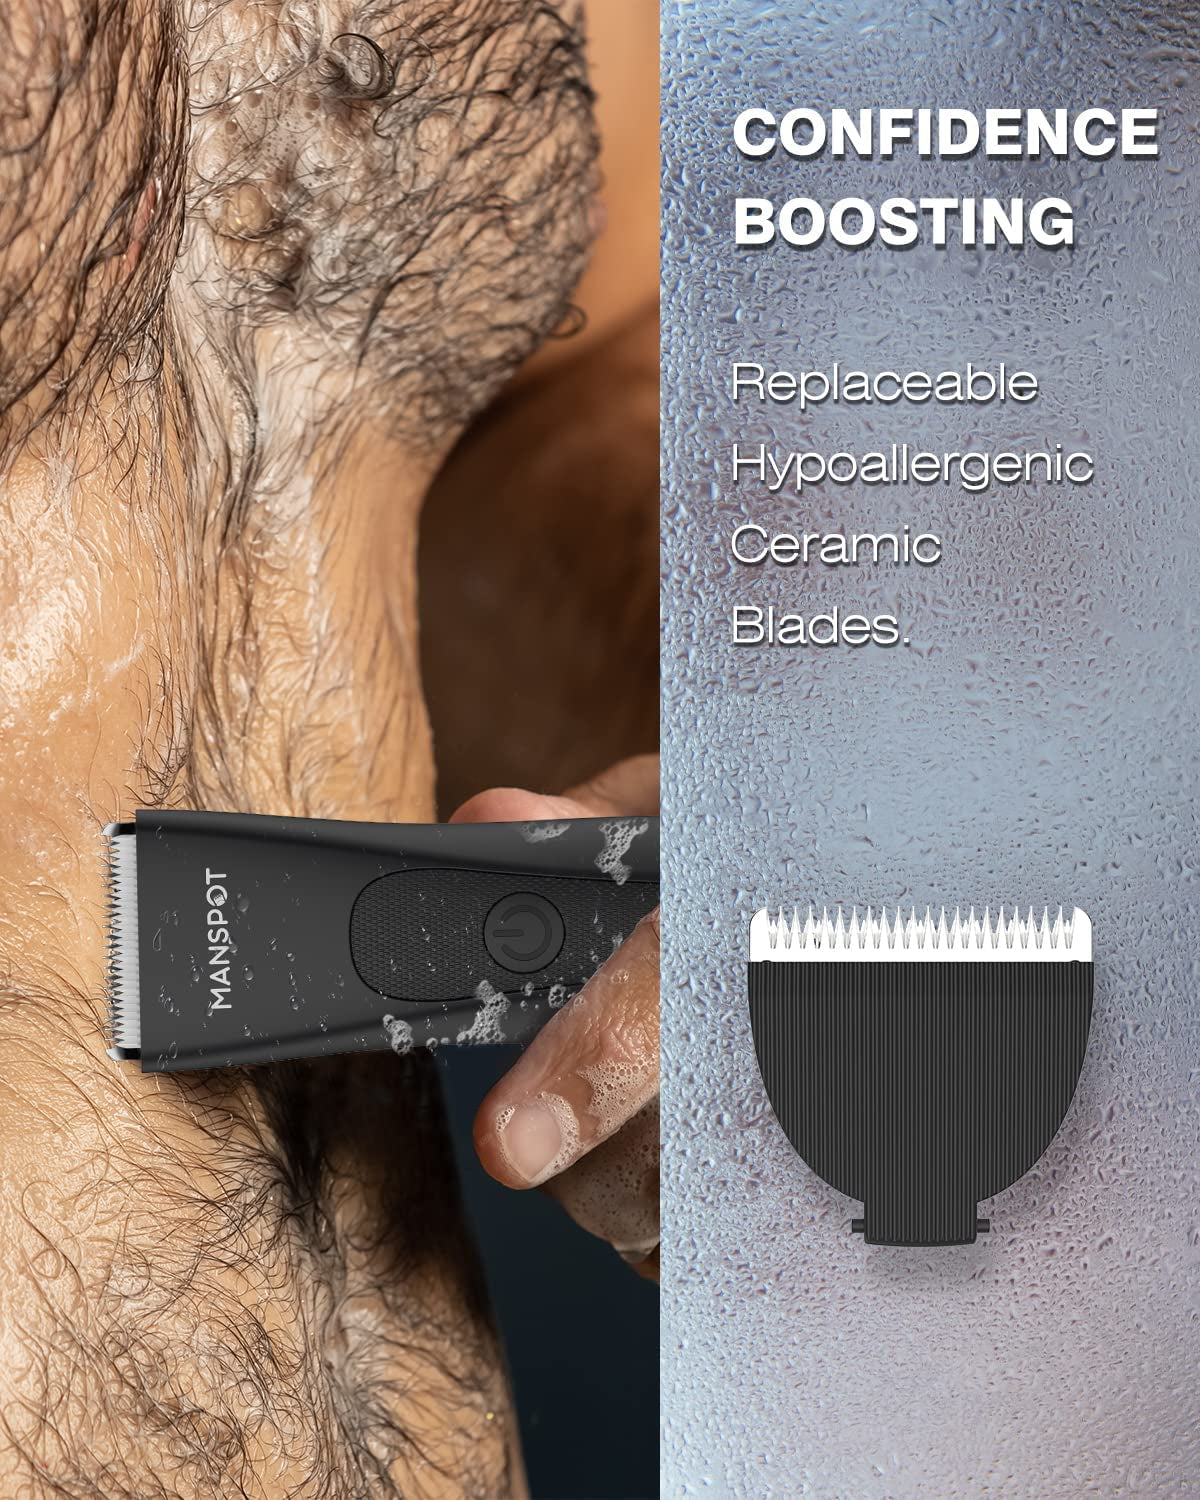 Hair Trimmer - Electric Trimmer/Shaver Ceramic Blade Heads Wet/Dry Groin & Body Shaver